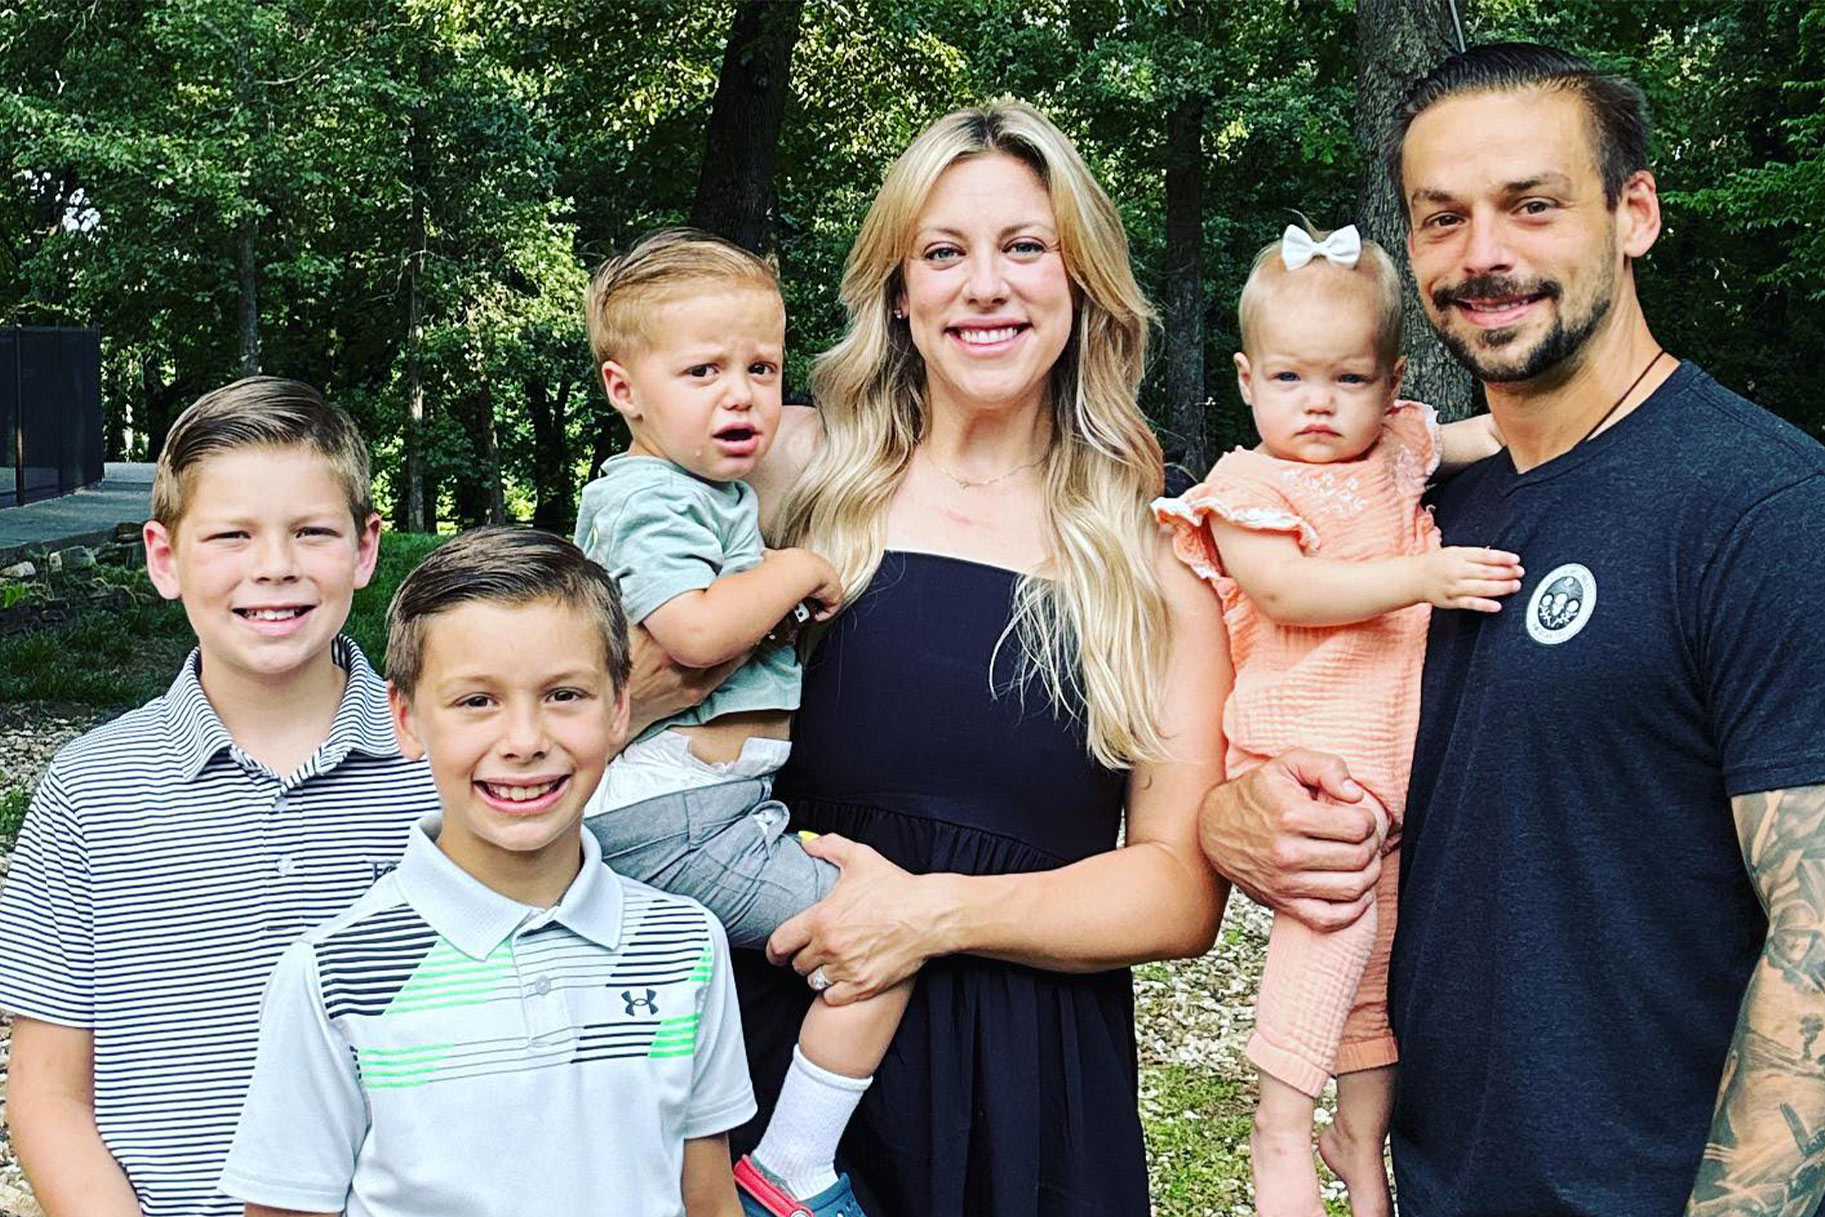 Briana Culberson Shares a Look at Her Family's Super Bowl Sunday The